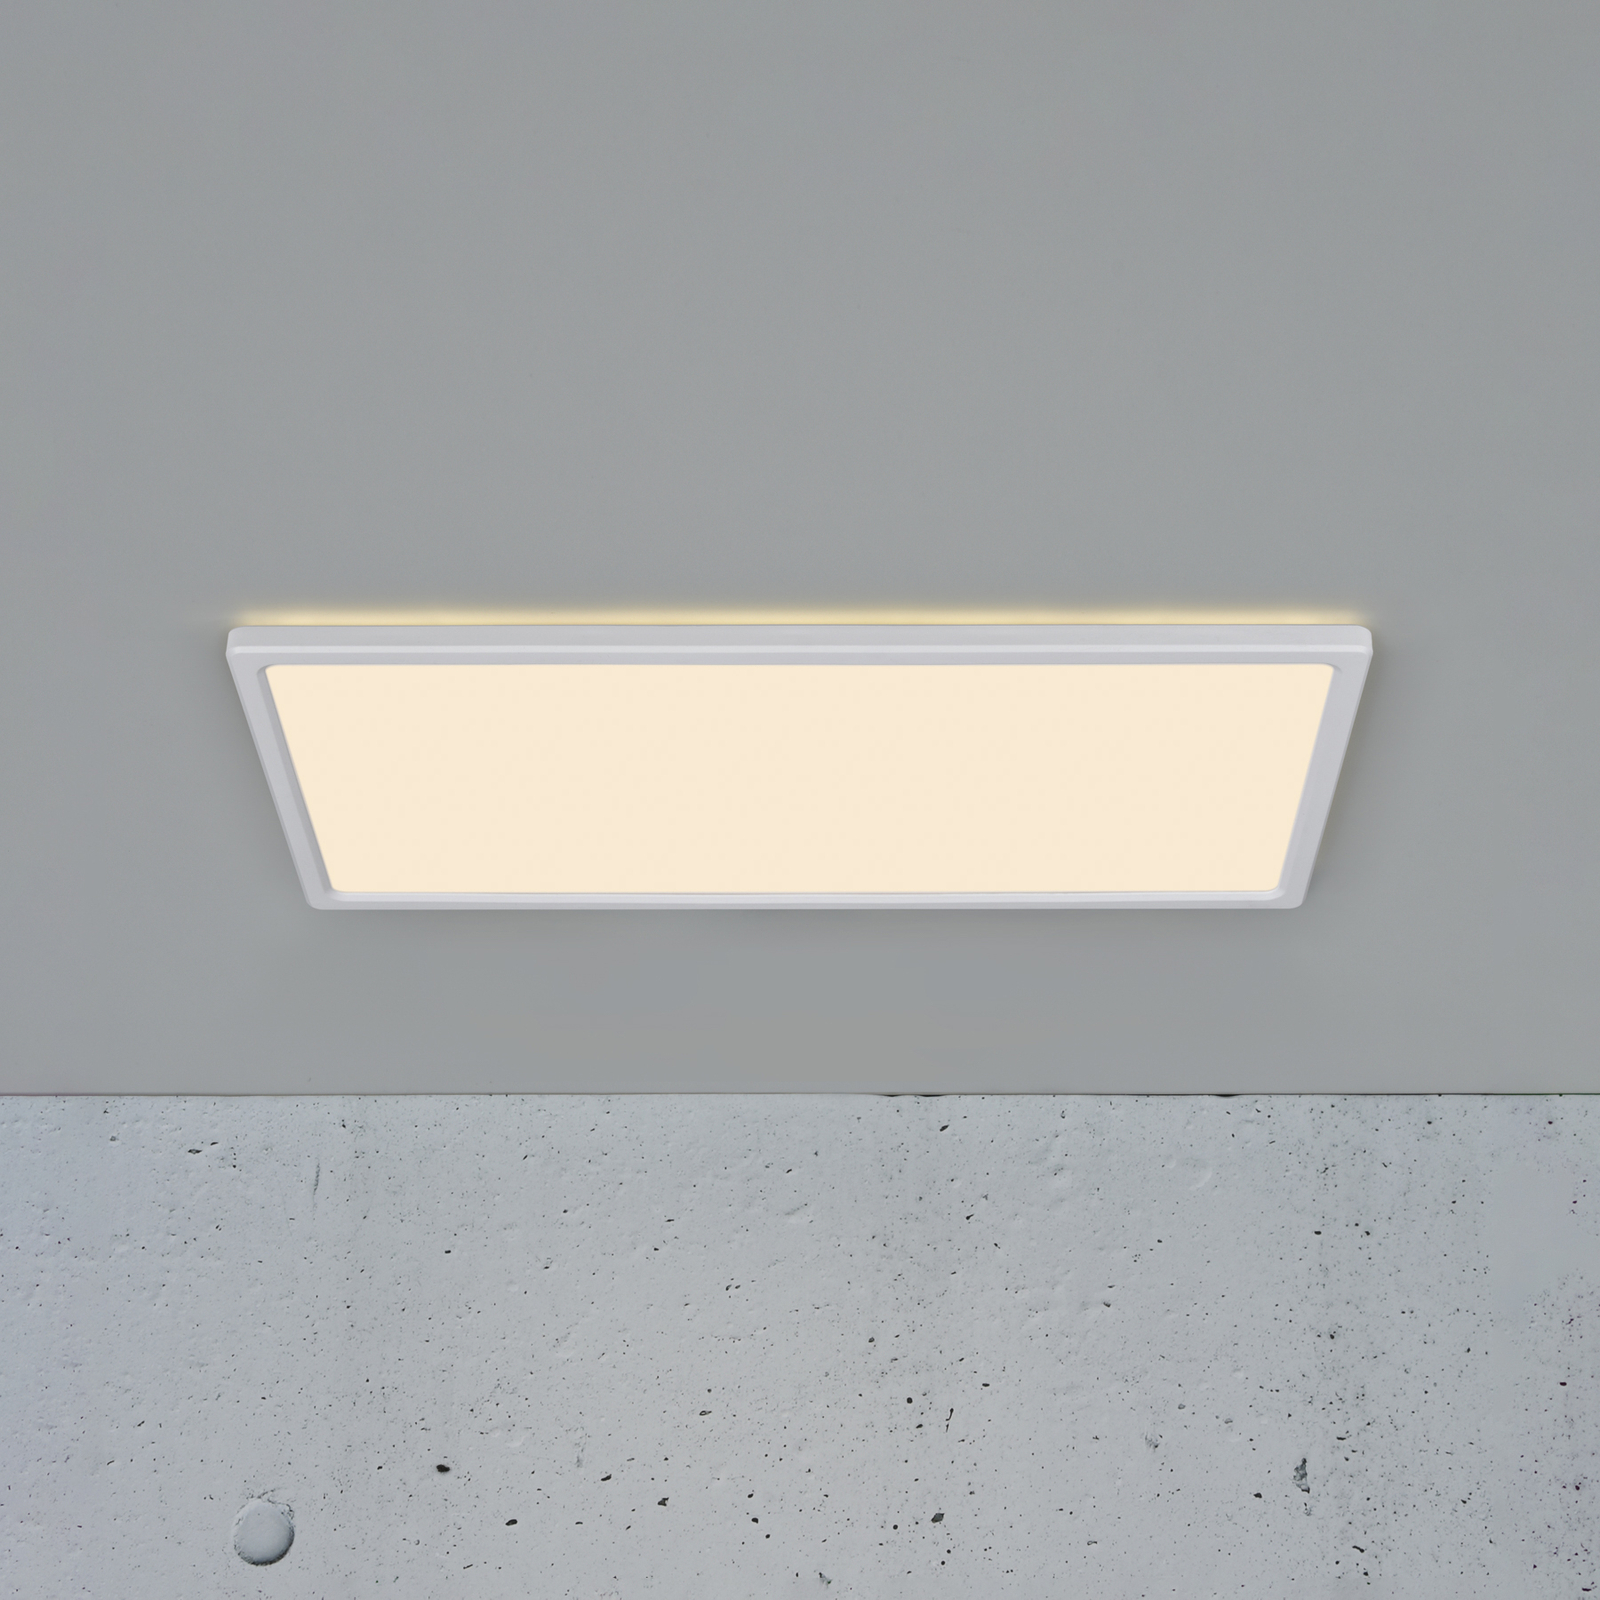 LED ceiling light Harlow Smart 60 CCT and RGB